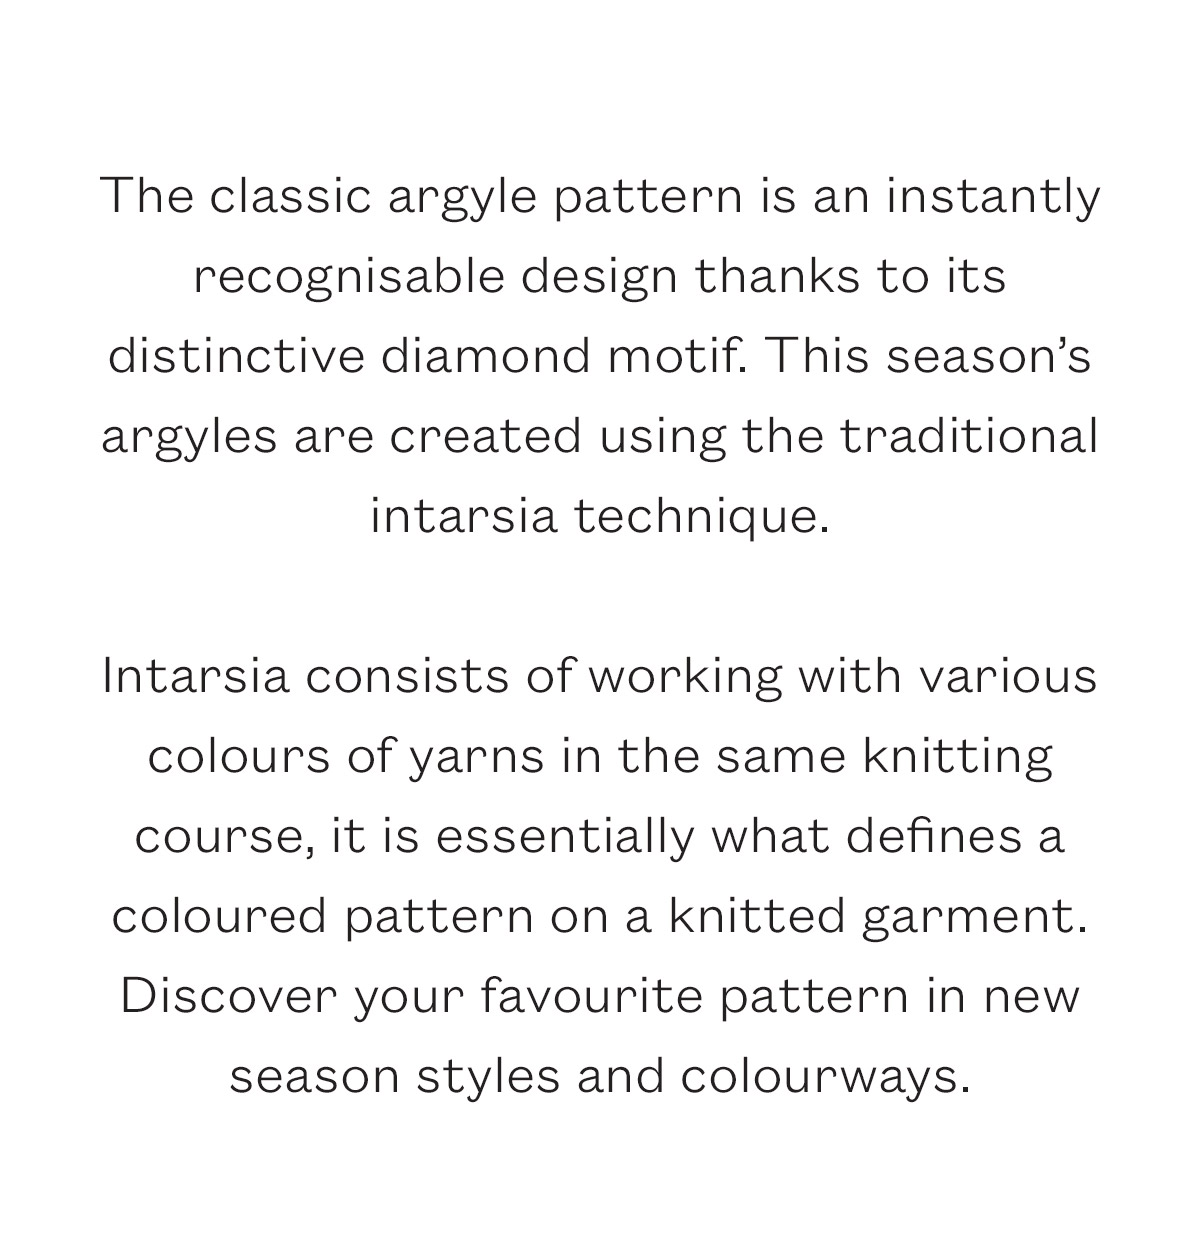 The classic argyle pattern is an instantly recognisable design thanks to its distinctive diamond motif.   The traditional intarsia technique consists of working with various colours of yarns in the same knitting course, it is essentially what defines a coloured pattern on a knitted garment.  Discover your favourite pattern in new season styles and colourways.